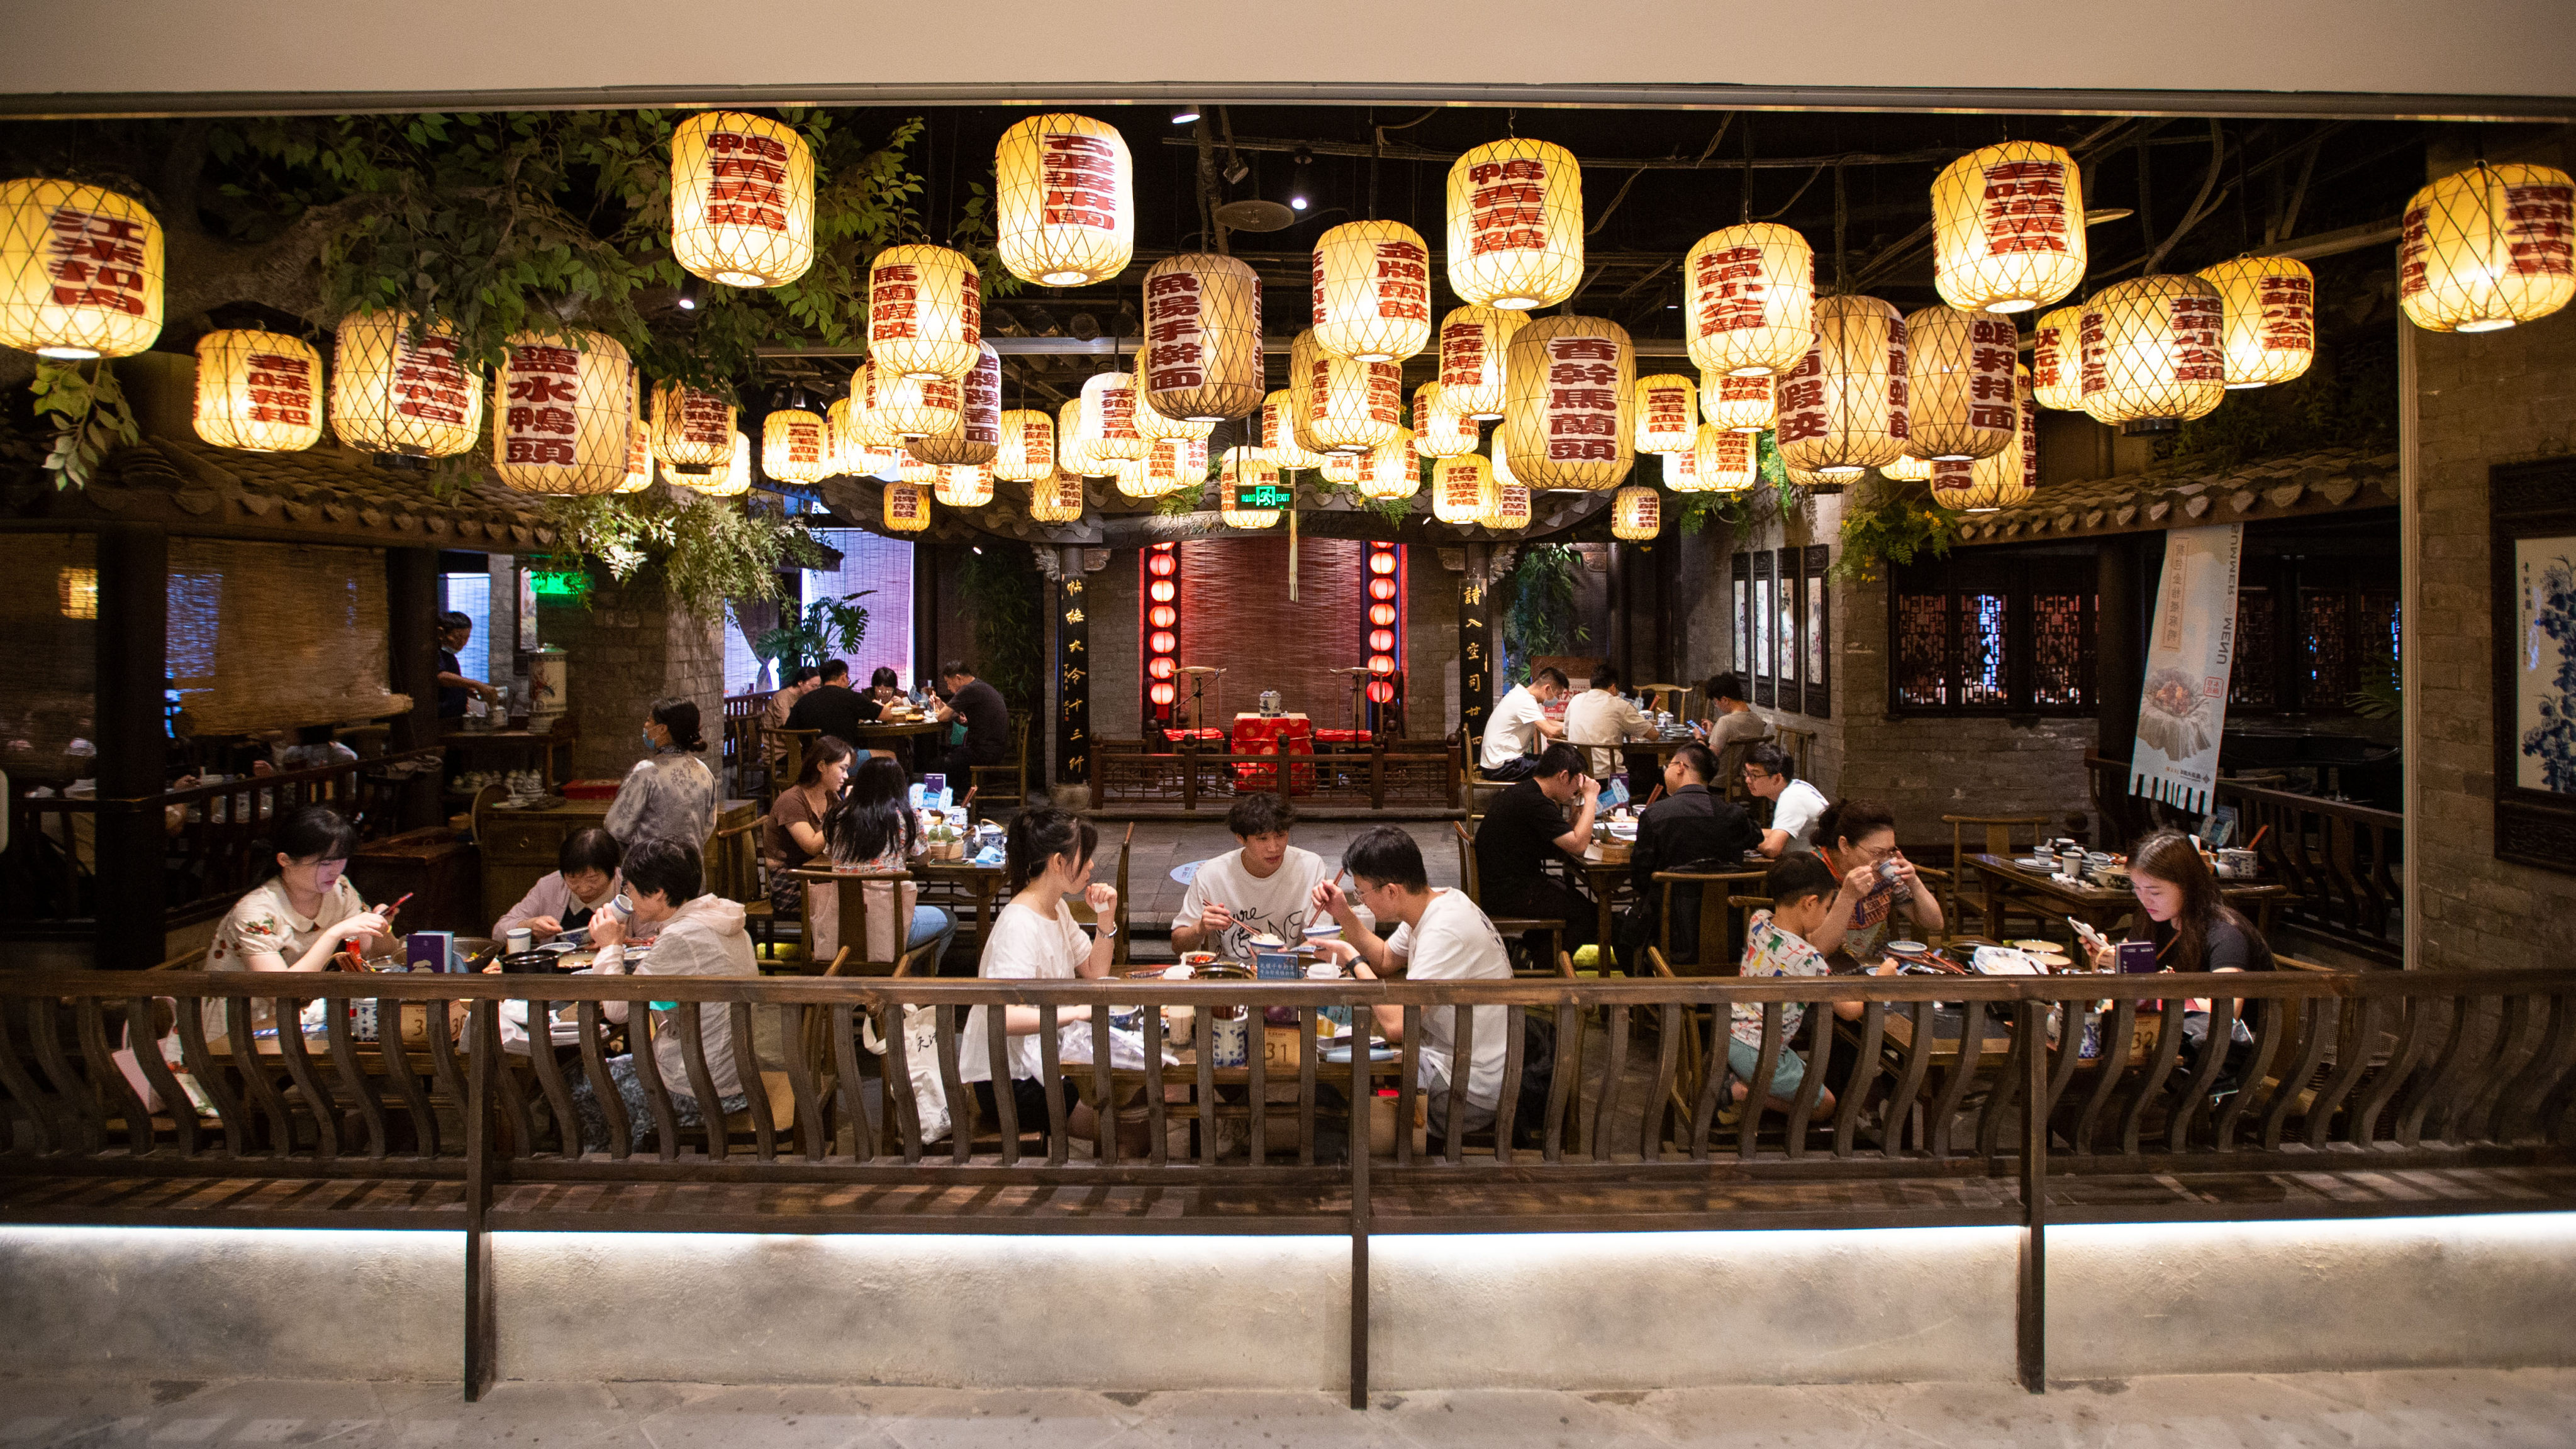 People dine in a restaurant in Nanjing in Jiangsu province on September 11, during the three-day Mid-Autumn holiday. Chinese consumption, along with the Chinese economy, is likely to recover when the zero-Covid policy is put to rest. Photo: Xinhua